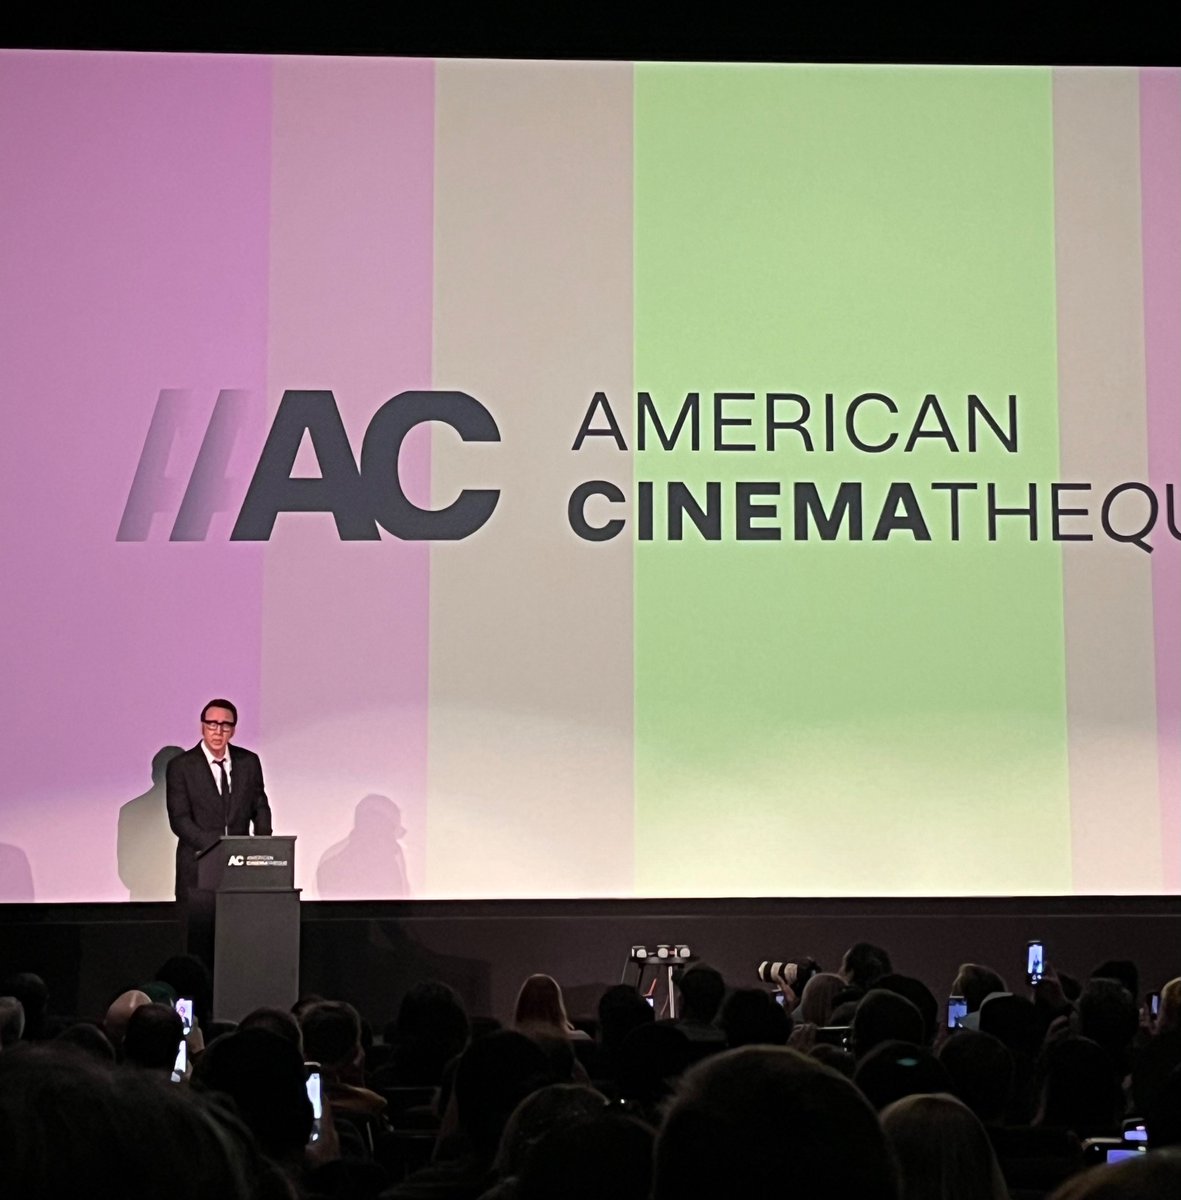 Nicolas Cage introducing VALLEY GIRL at the Aero @am_cinematheque with a heartfelt speech thanking Martha Coolidge. His audition for Randy was his last before he was going to give up acting and join the Merchant Marines to write short stories, he said.